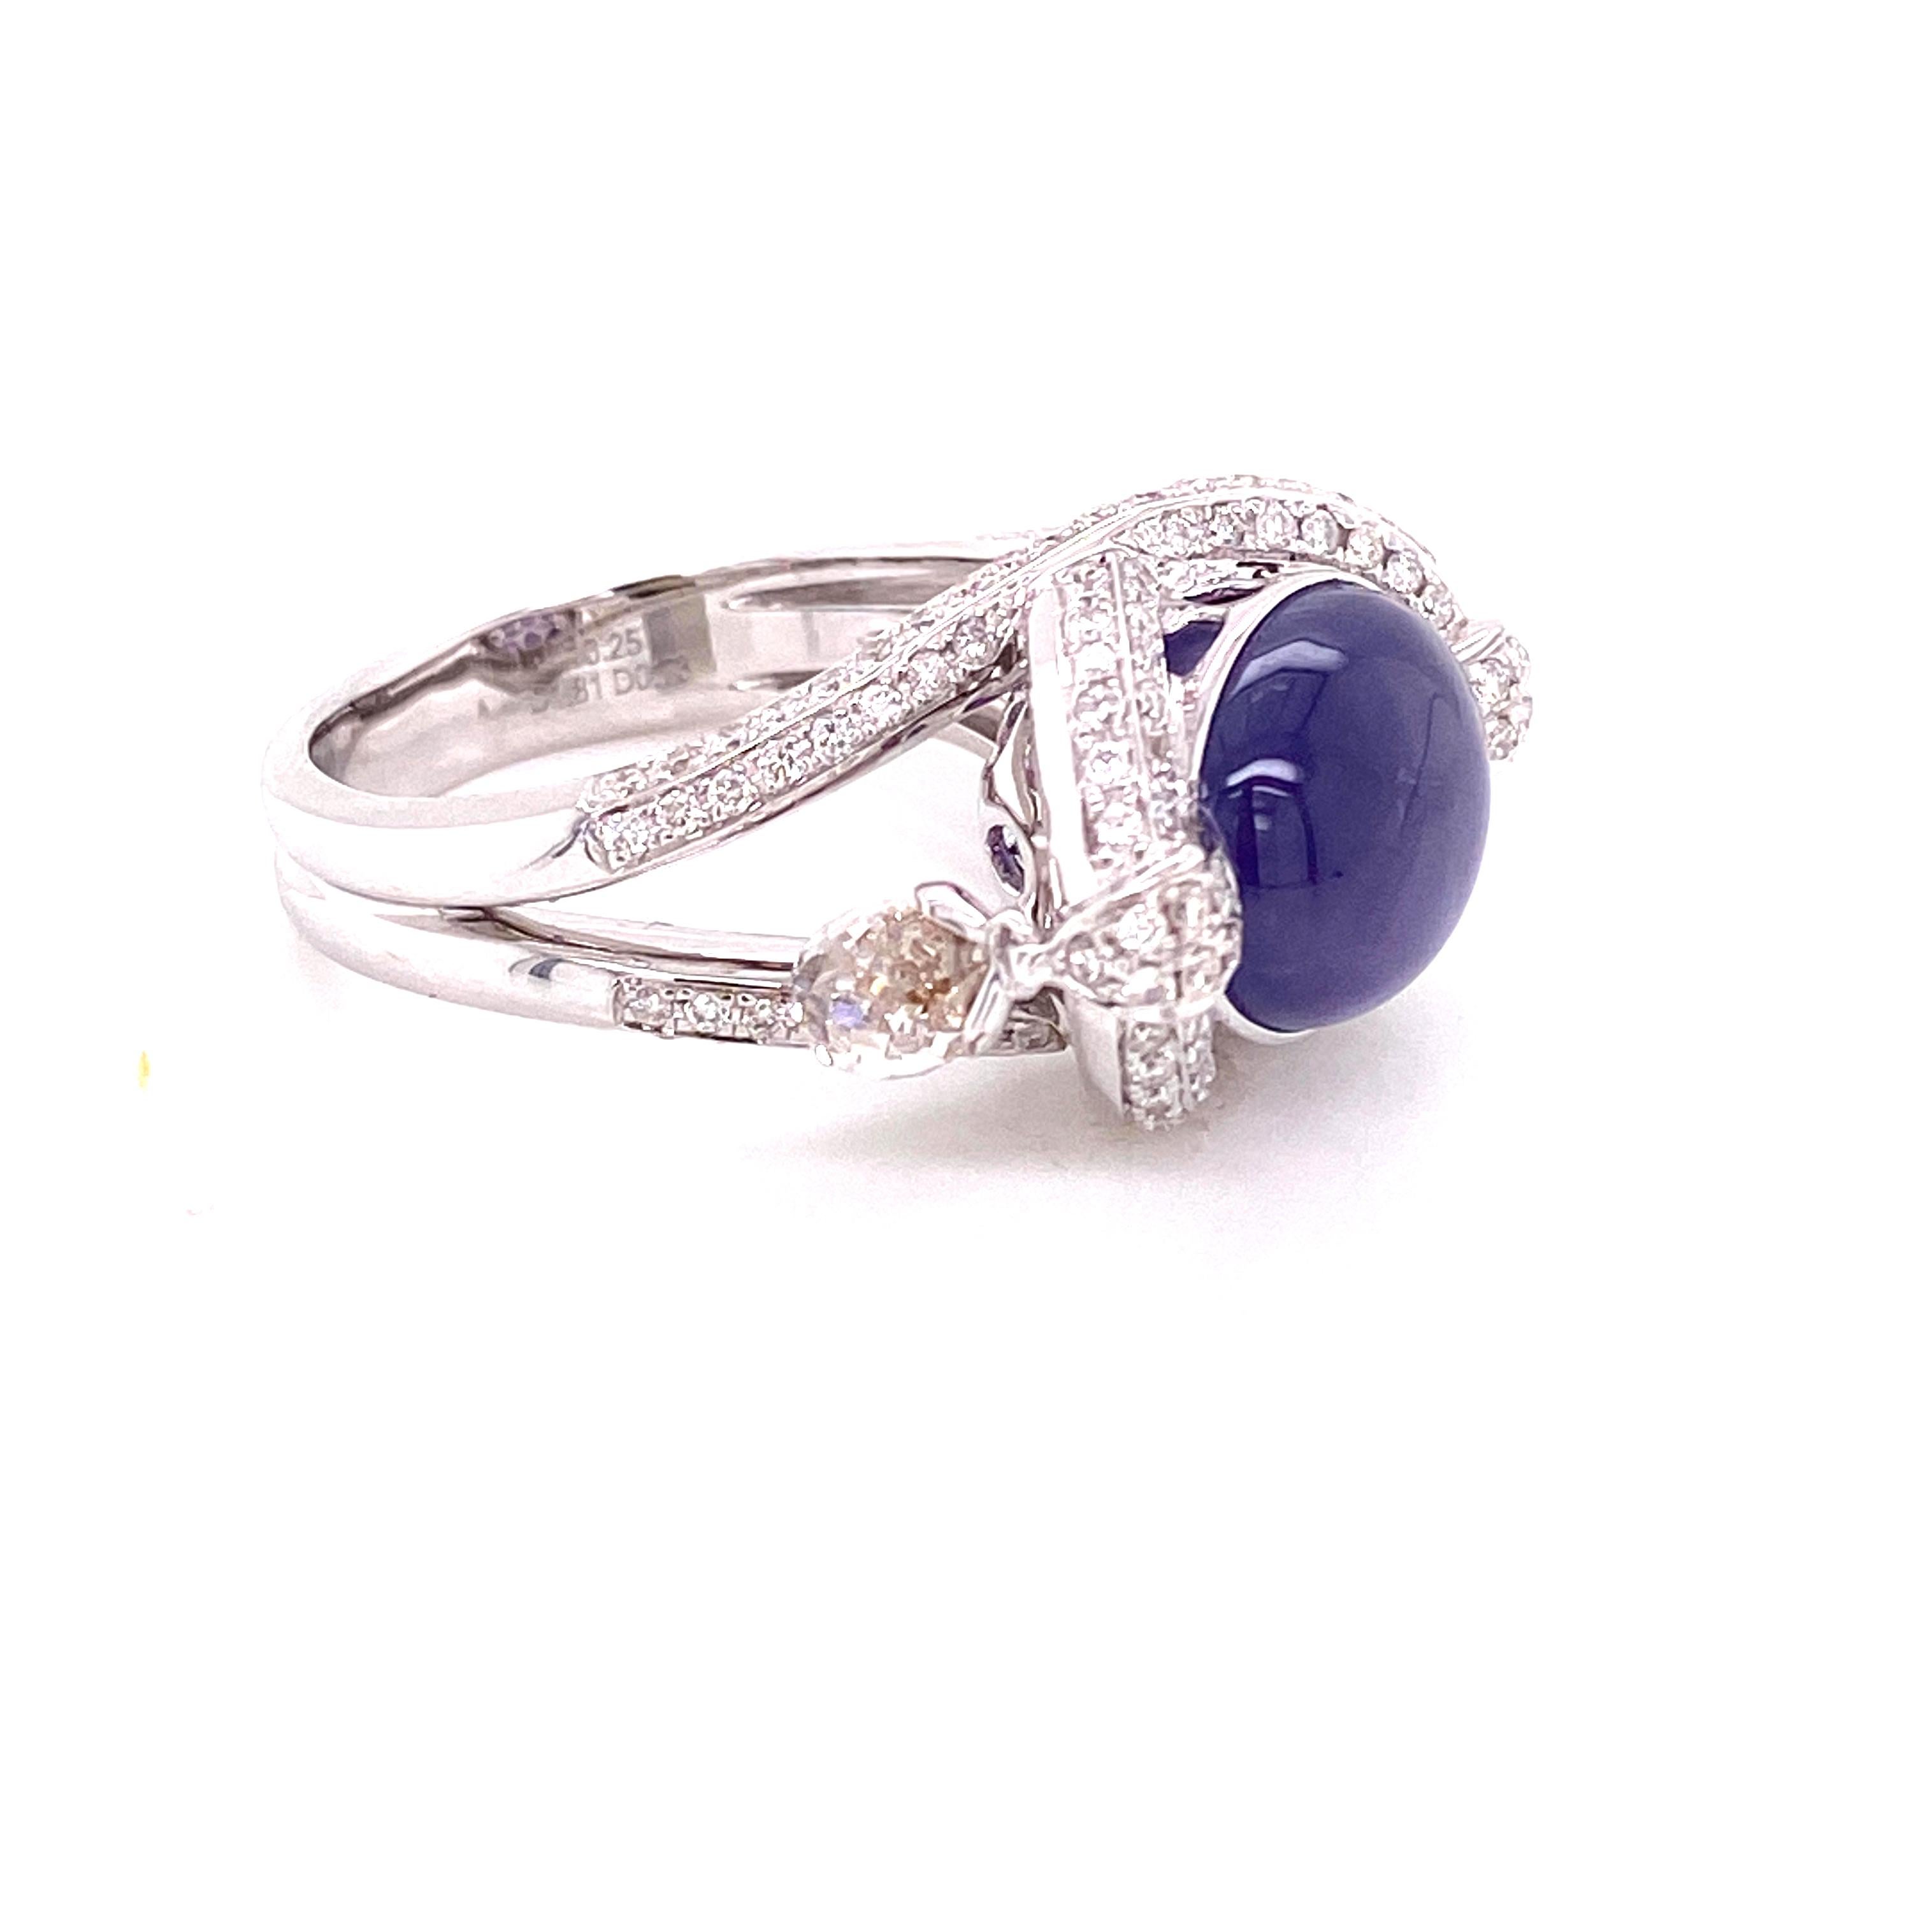 10.25 Carat No Heat Star Sapphire and White Diamond Briolette Engagement Ring:

A unique ring, it features a 10.25 carat unheated lavender star sapphire and a pair of white diamond briolettes weighing 1.81 carat, with multiple white round brilliant